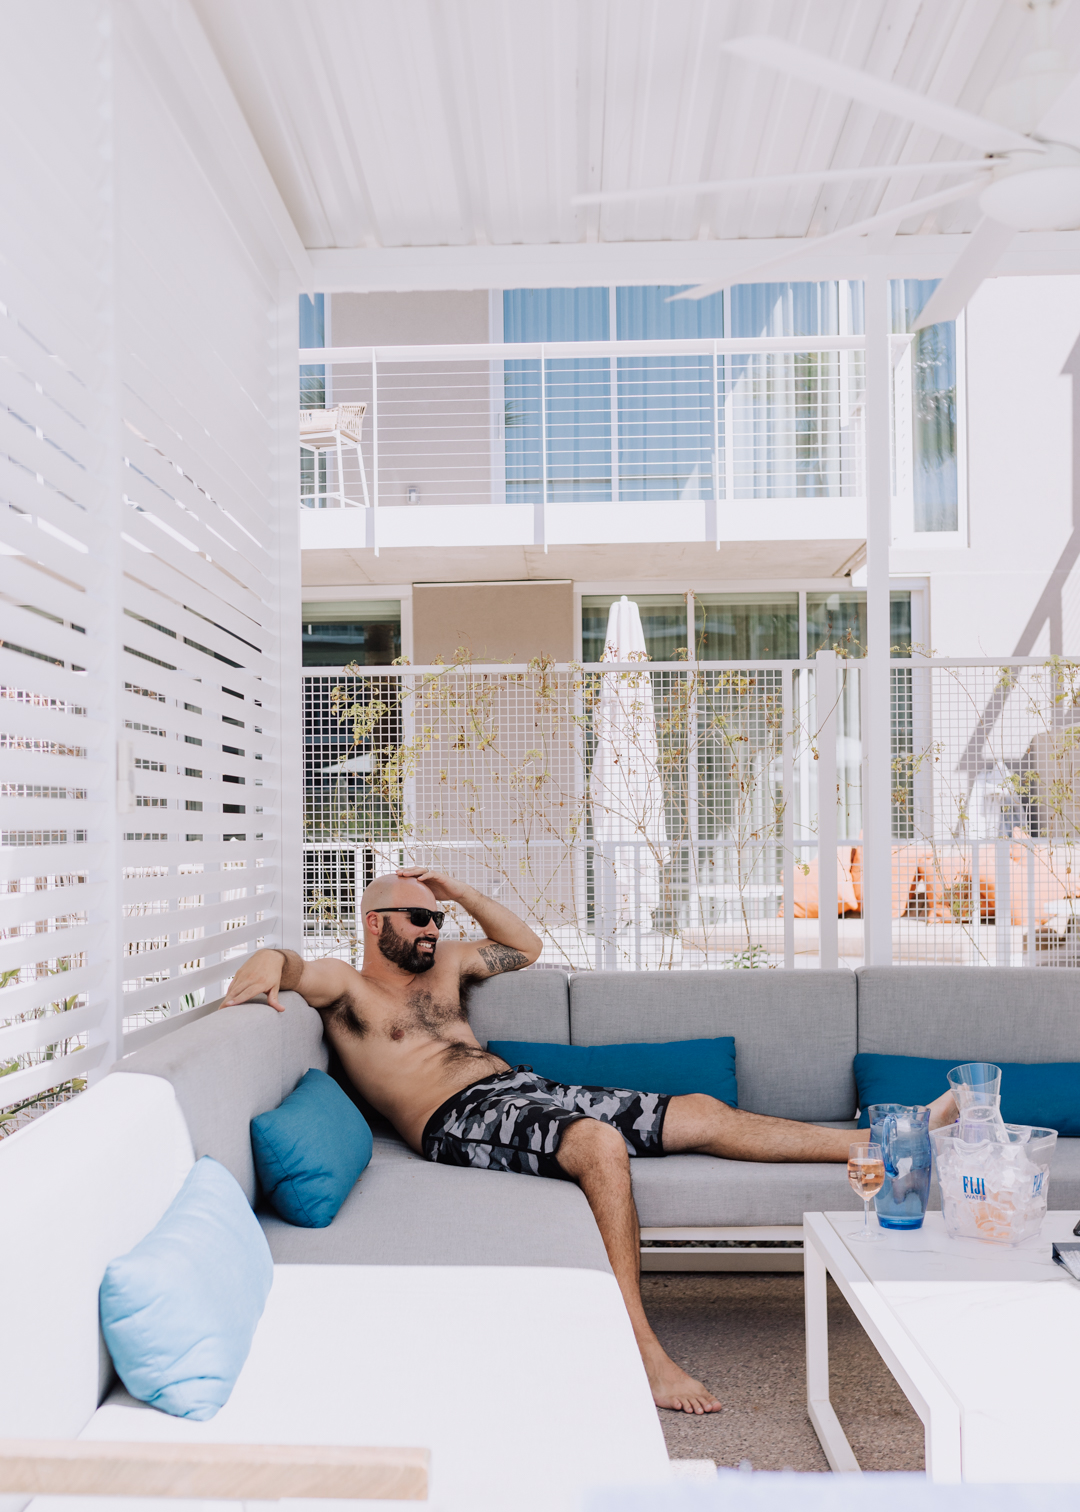 chillin in our cabana all day | thelovedesignedlife.com #staycation #cabanalife #midcenturymoderndesign #mcm